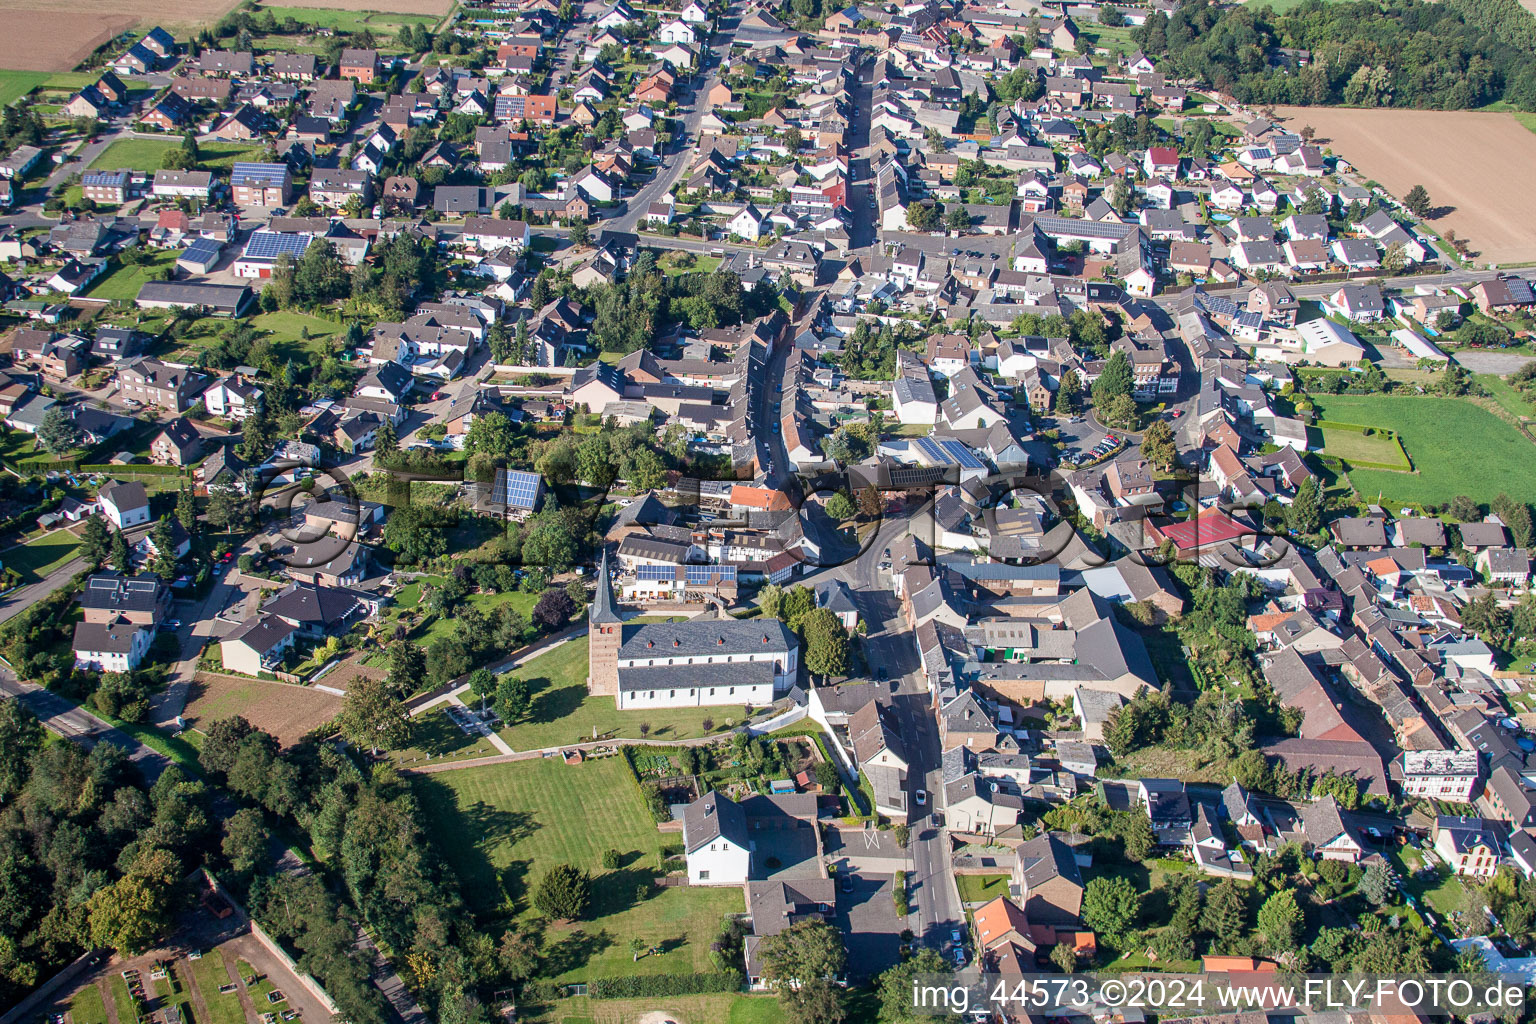 Aerial view of Village view in the district Lommersum in Weilerswist in the state North Rhine-Westphalia, Germany